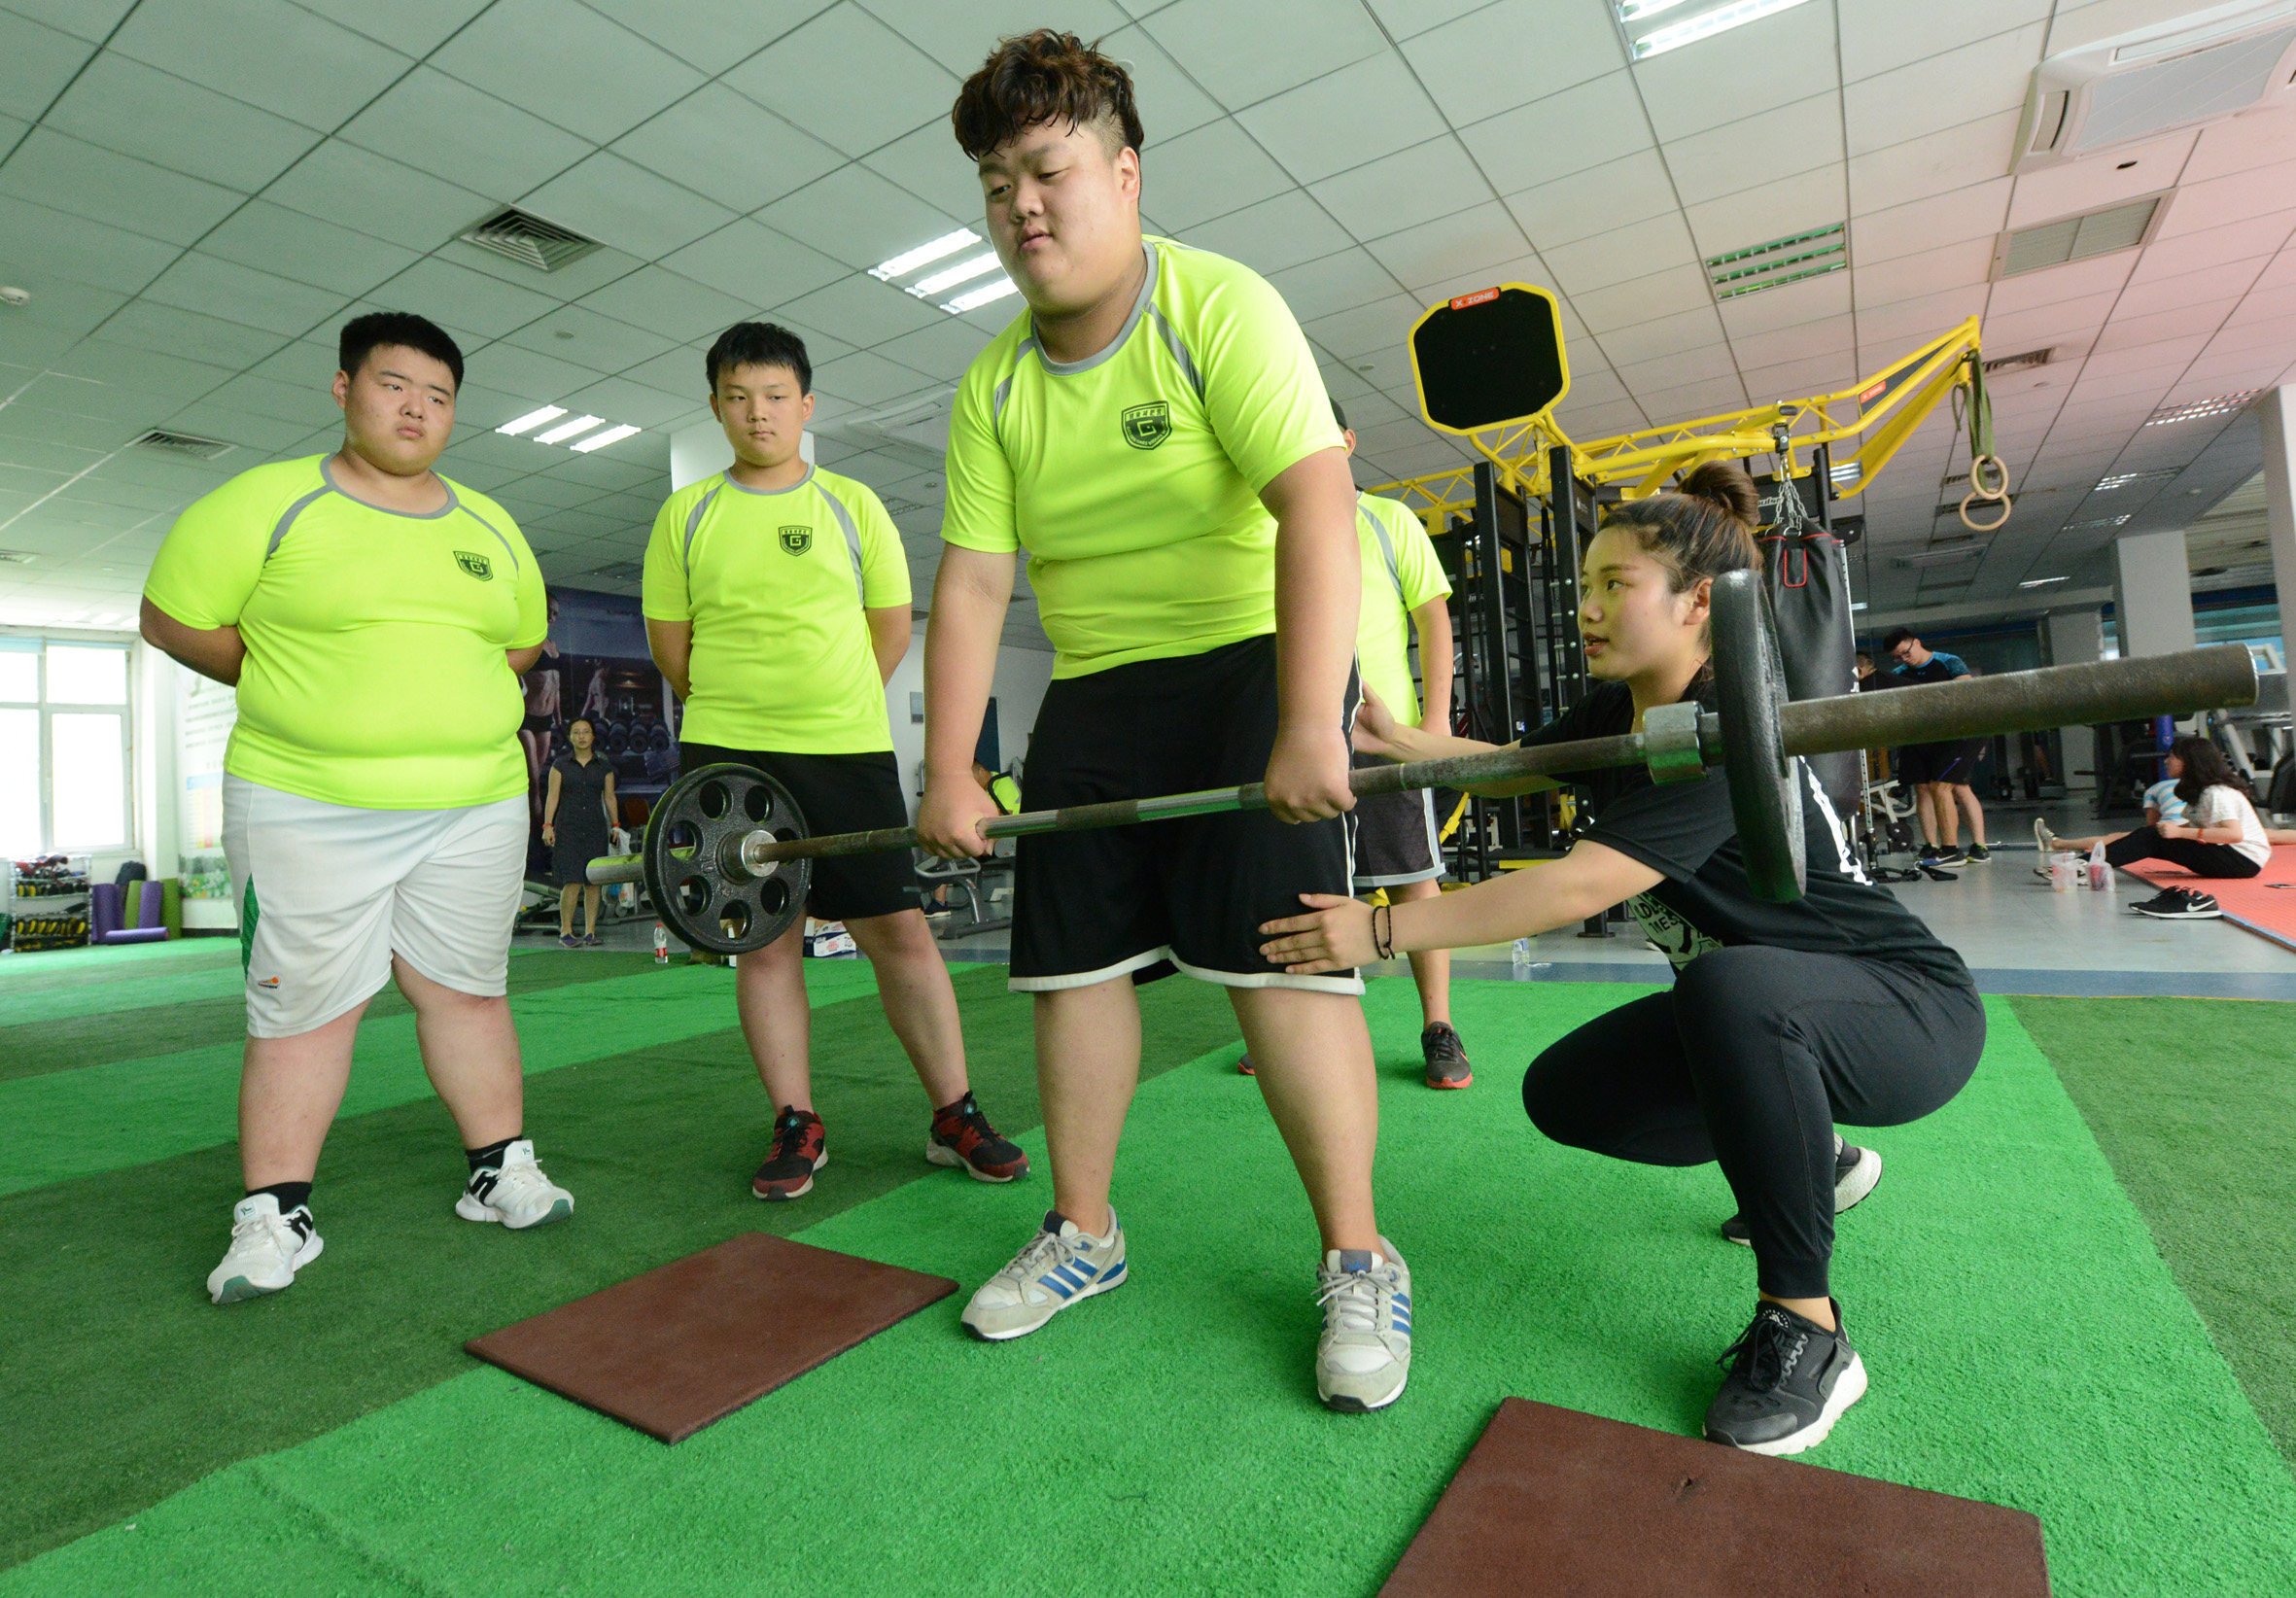 Obese Chinese students do exercise under the guidance of a coach at a summer camp in Zhengzhou, Henan Province of China. Photo: Getty